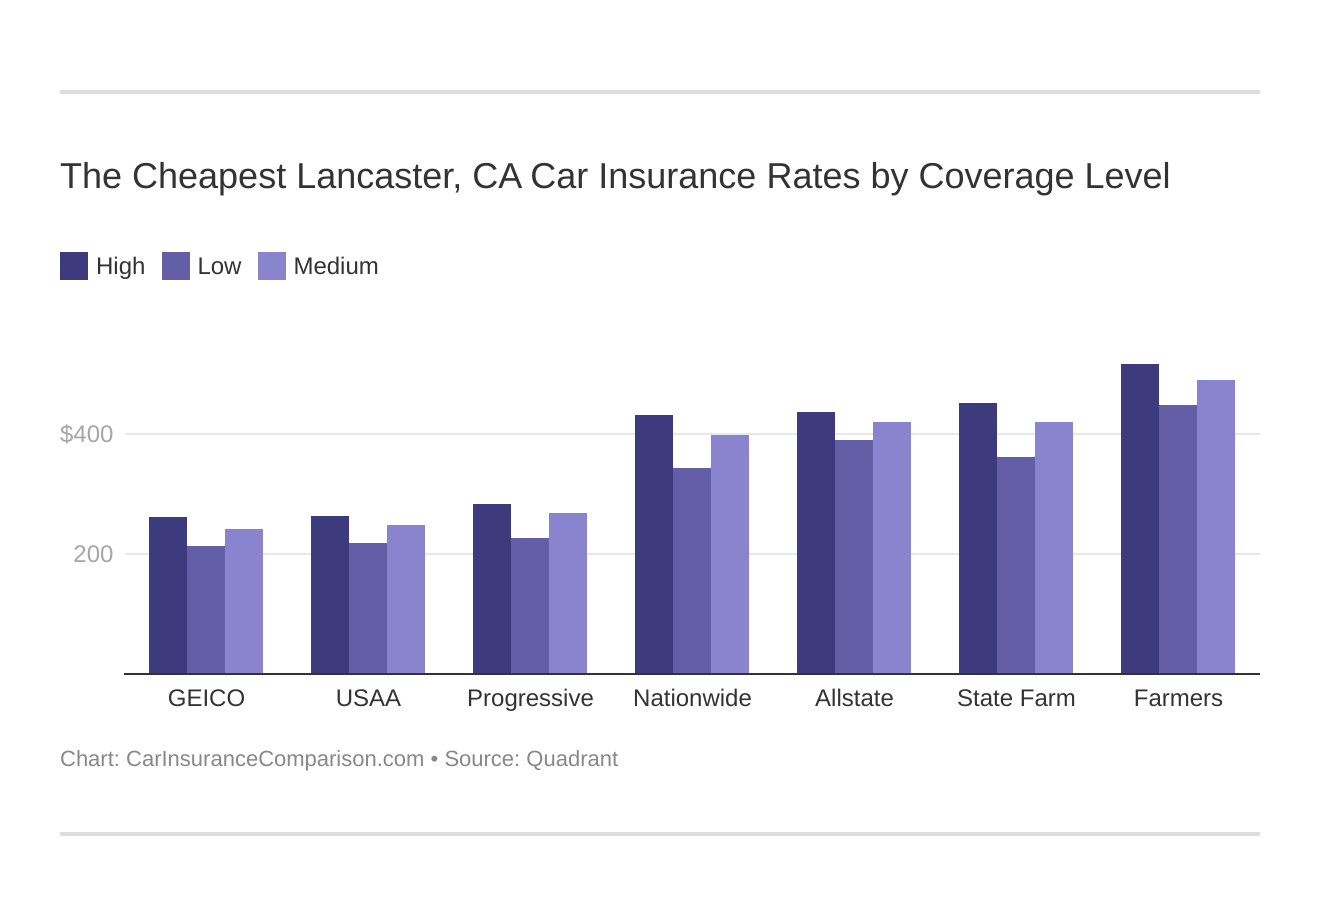 The Cheapest Lancaster, CA Car Insurance Rates by Coverage Level